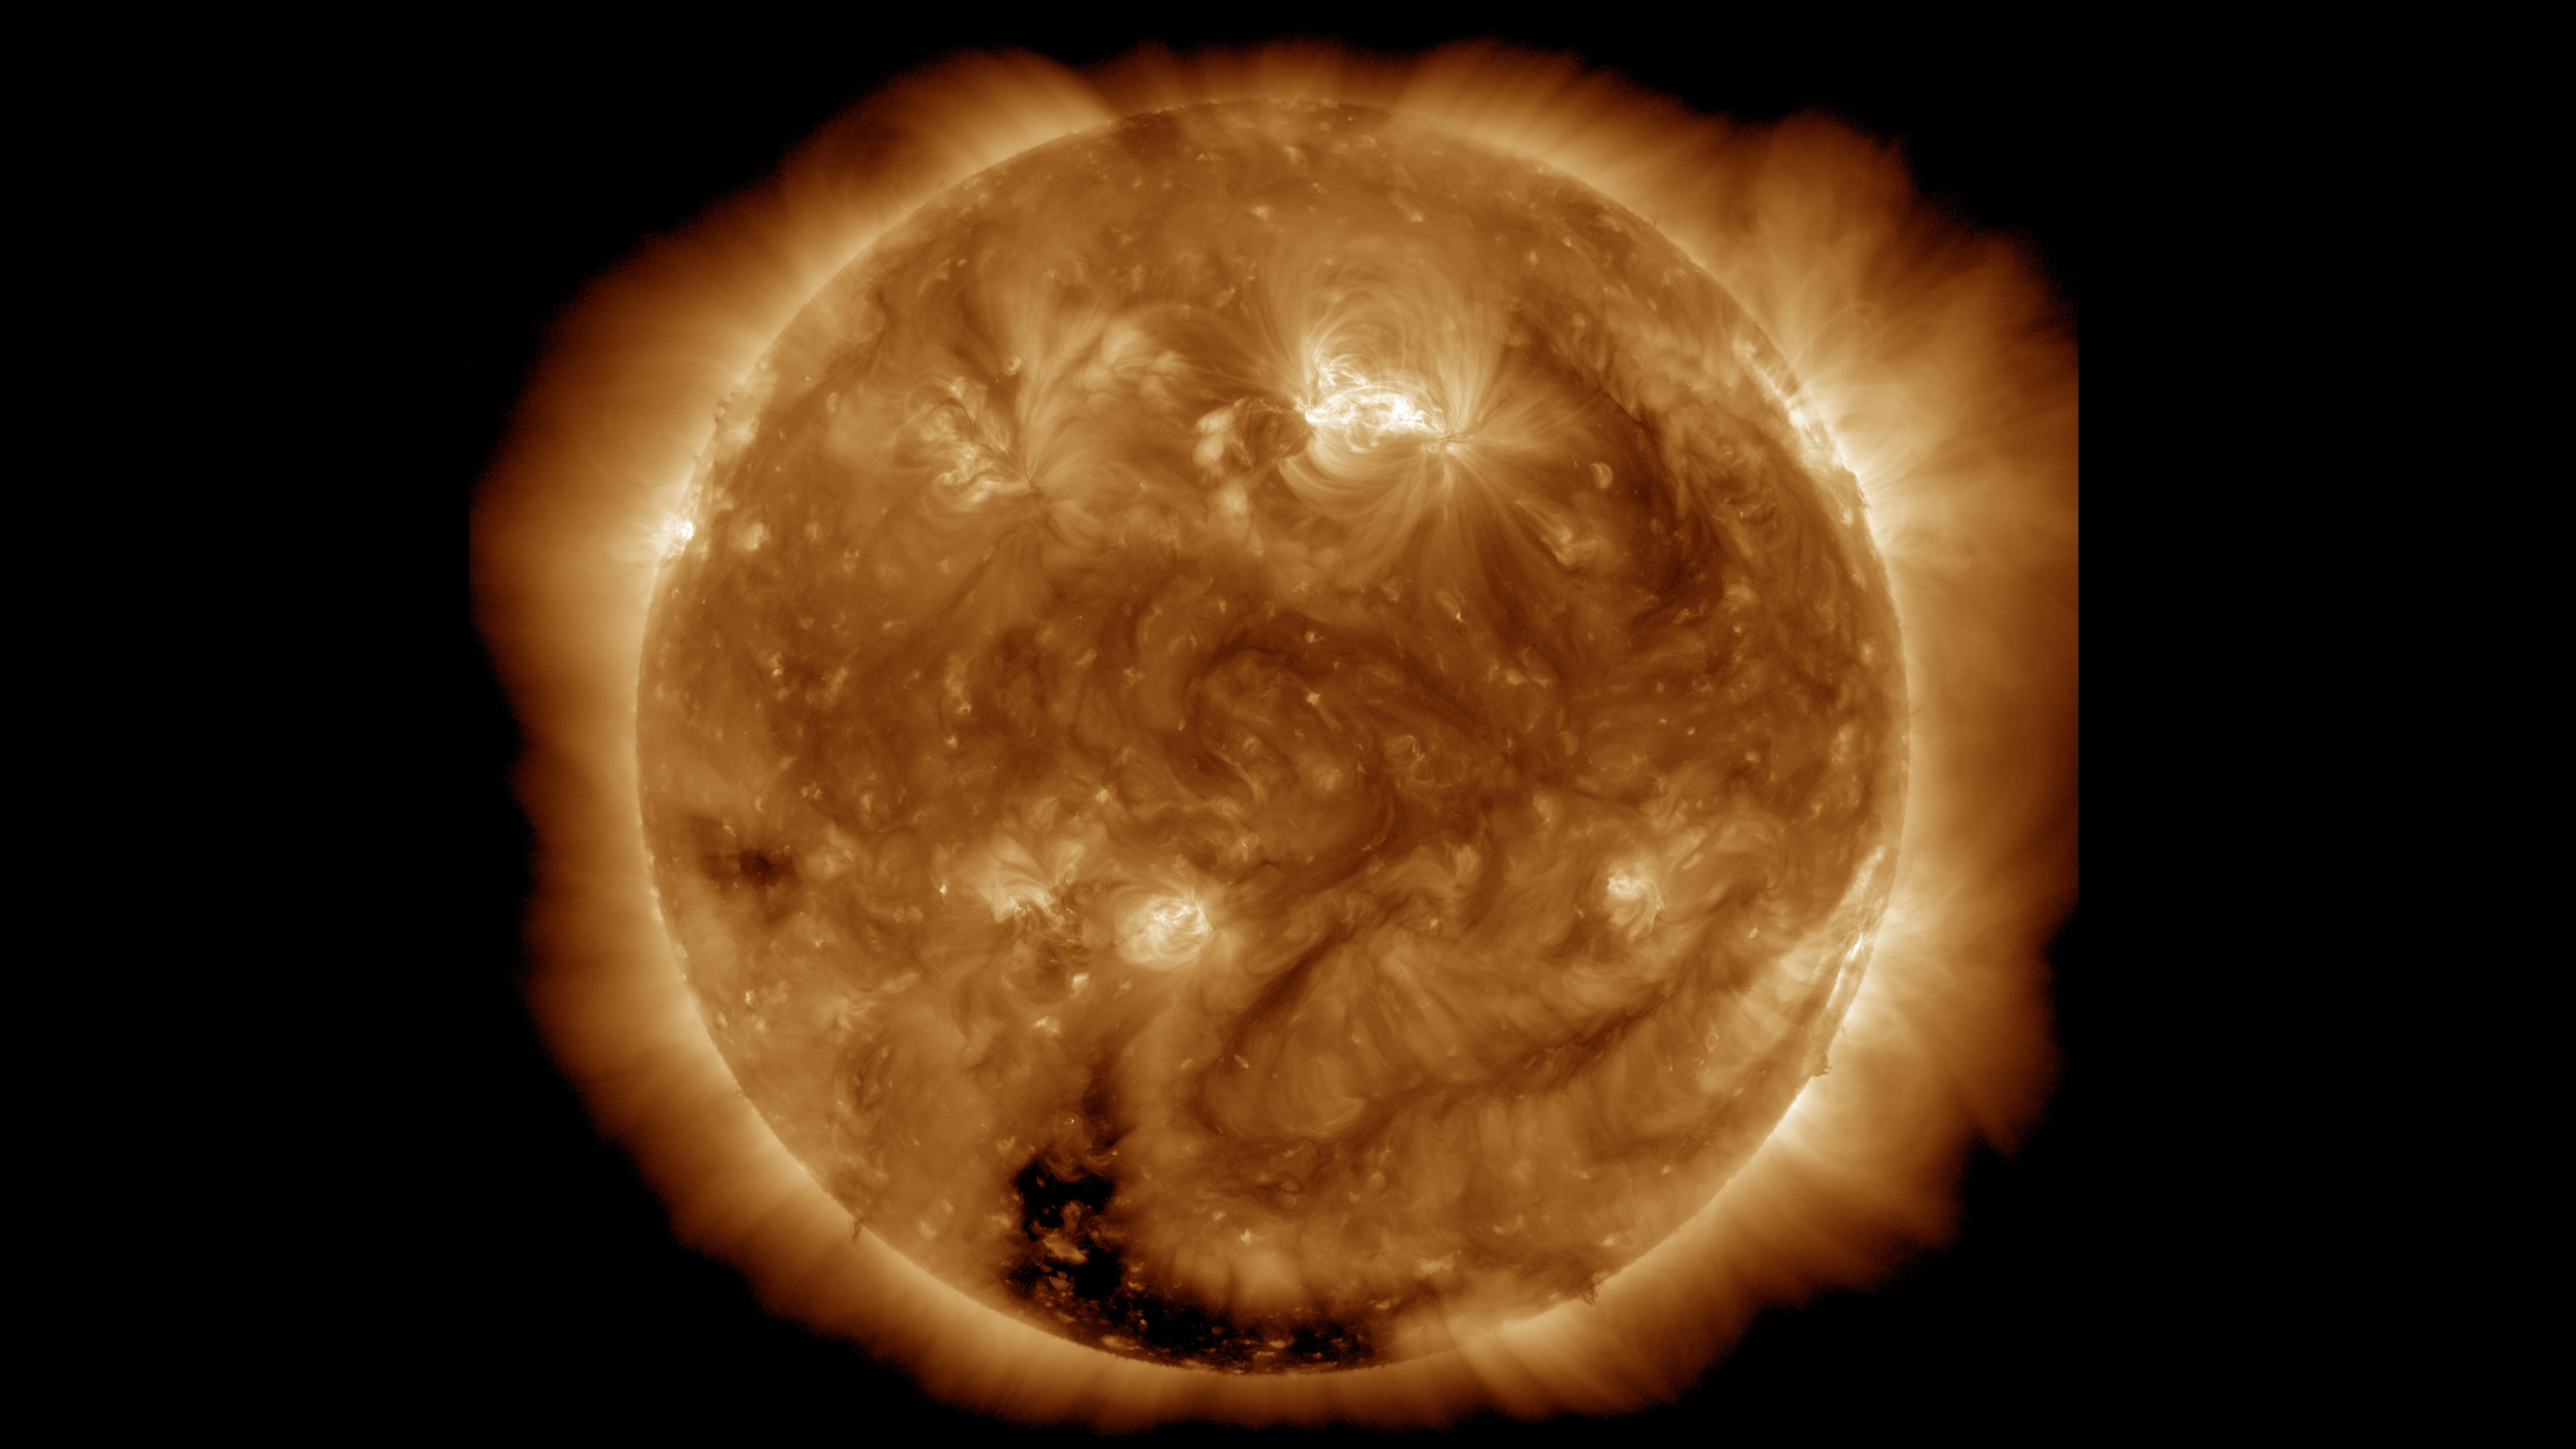 Our Sun is a Star - Facts About the Sun